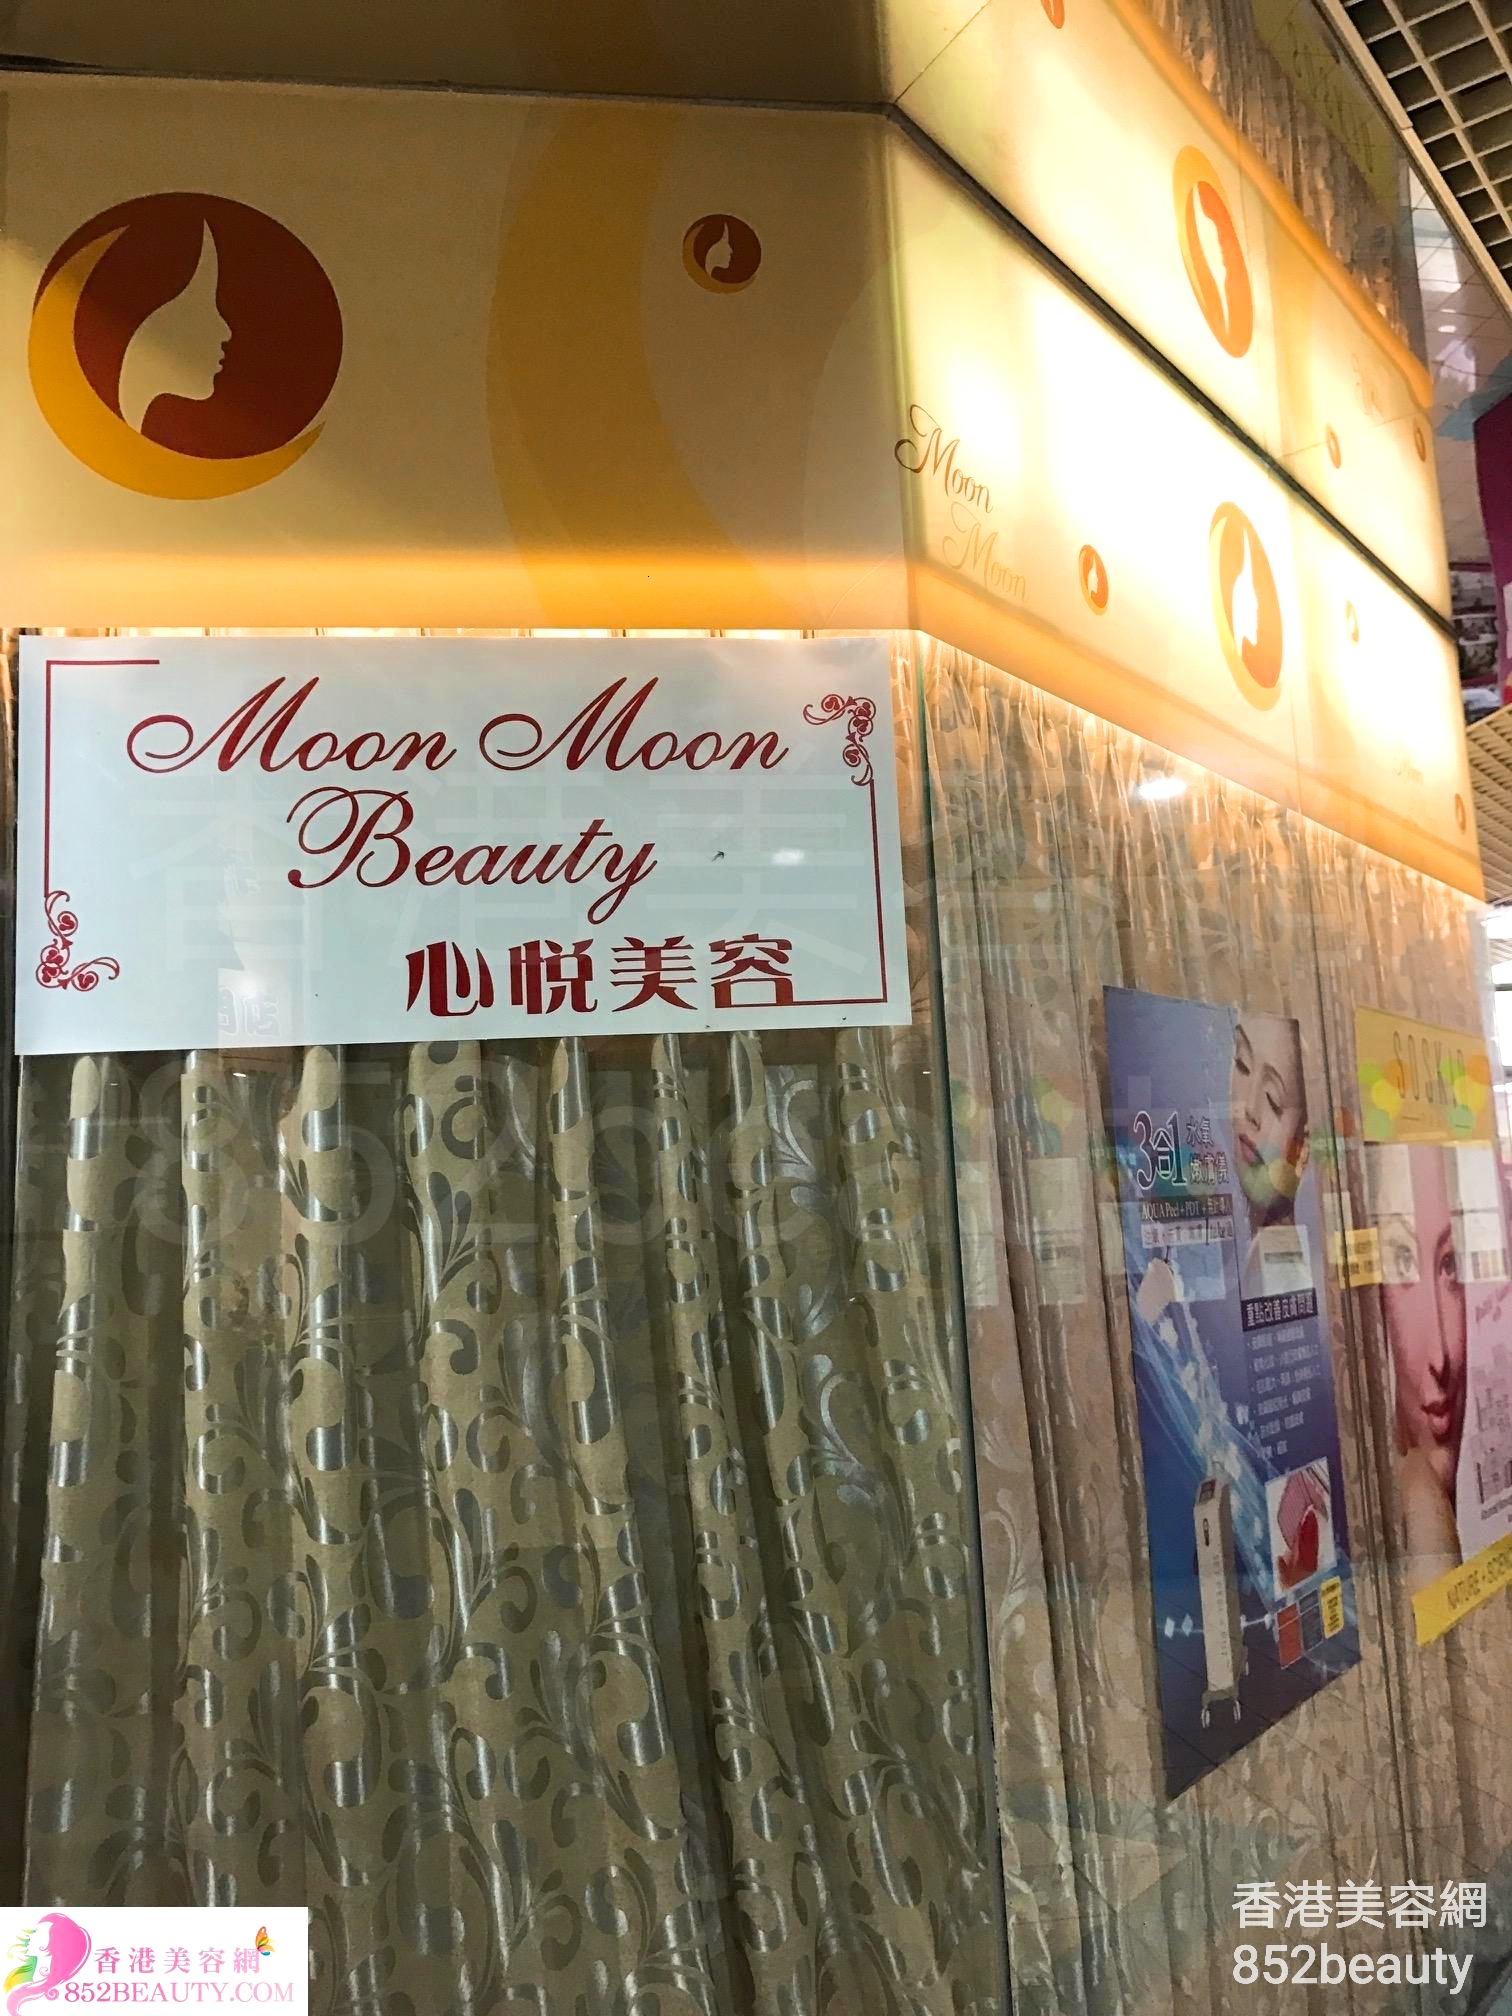 Facial Care: 心悅美容 Moon Moon Beauty